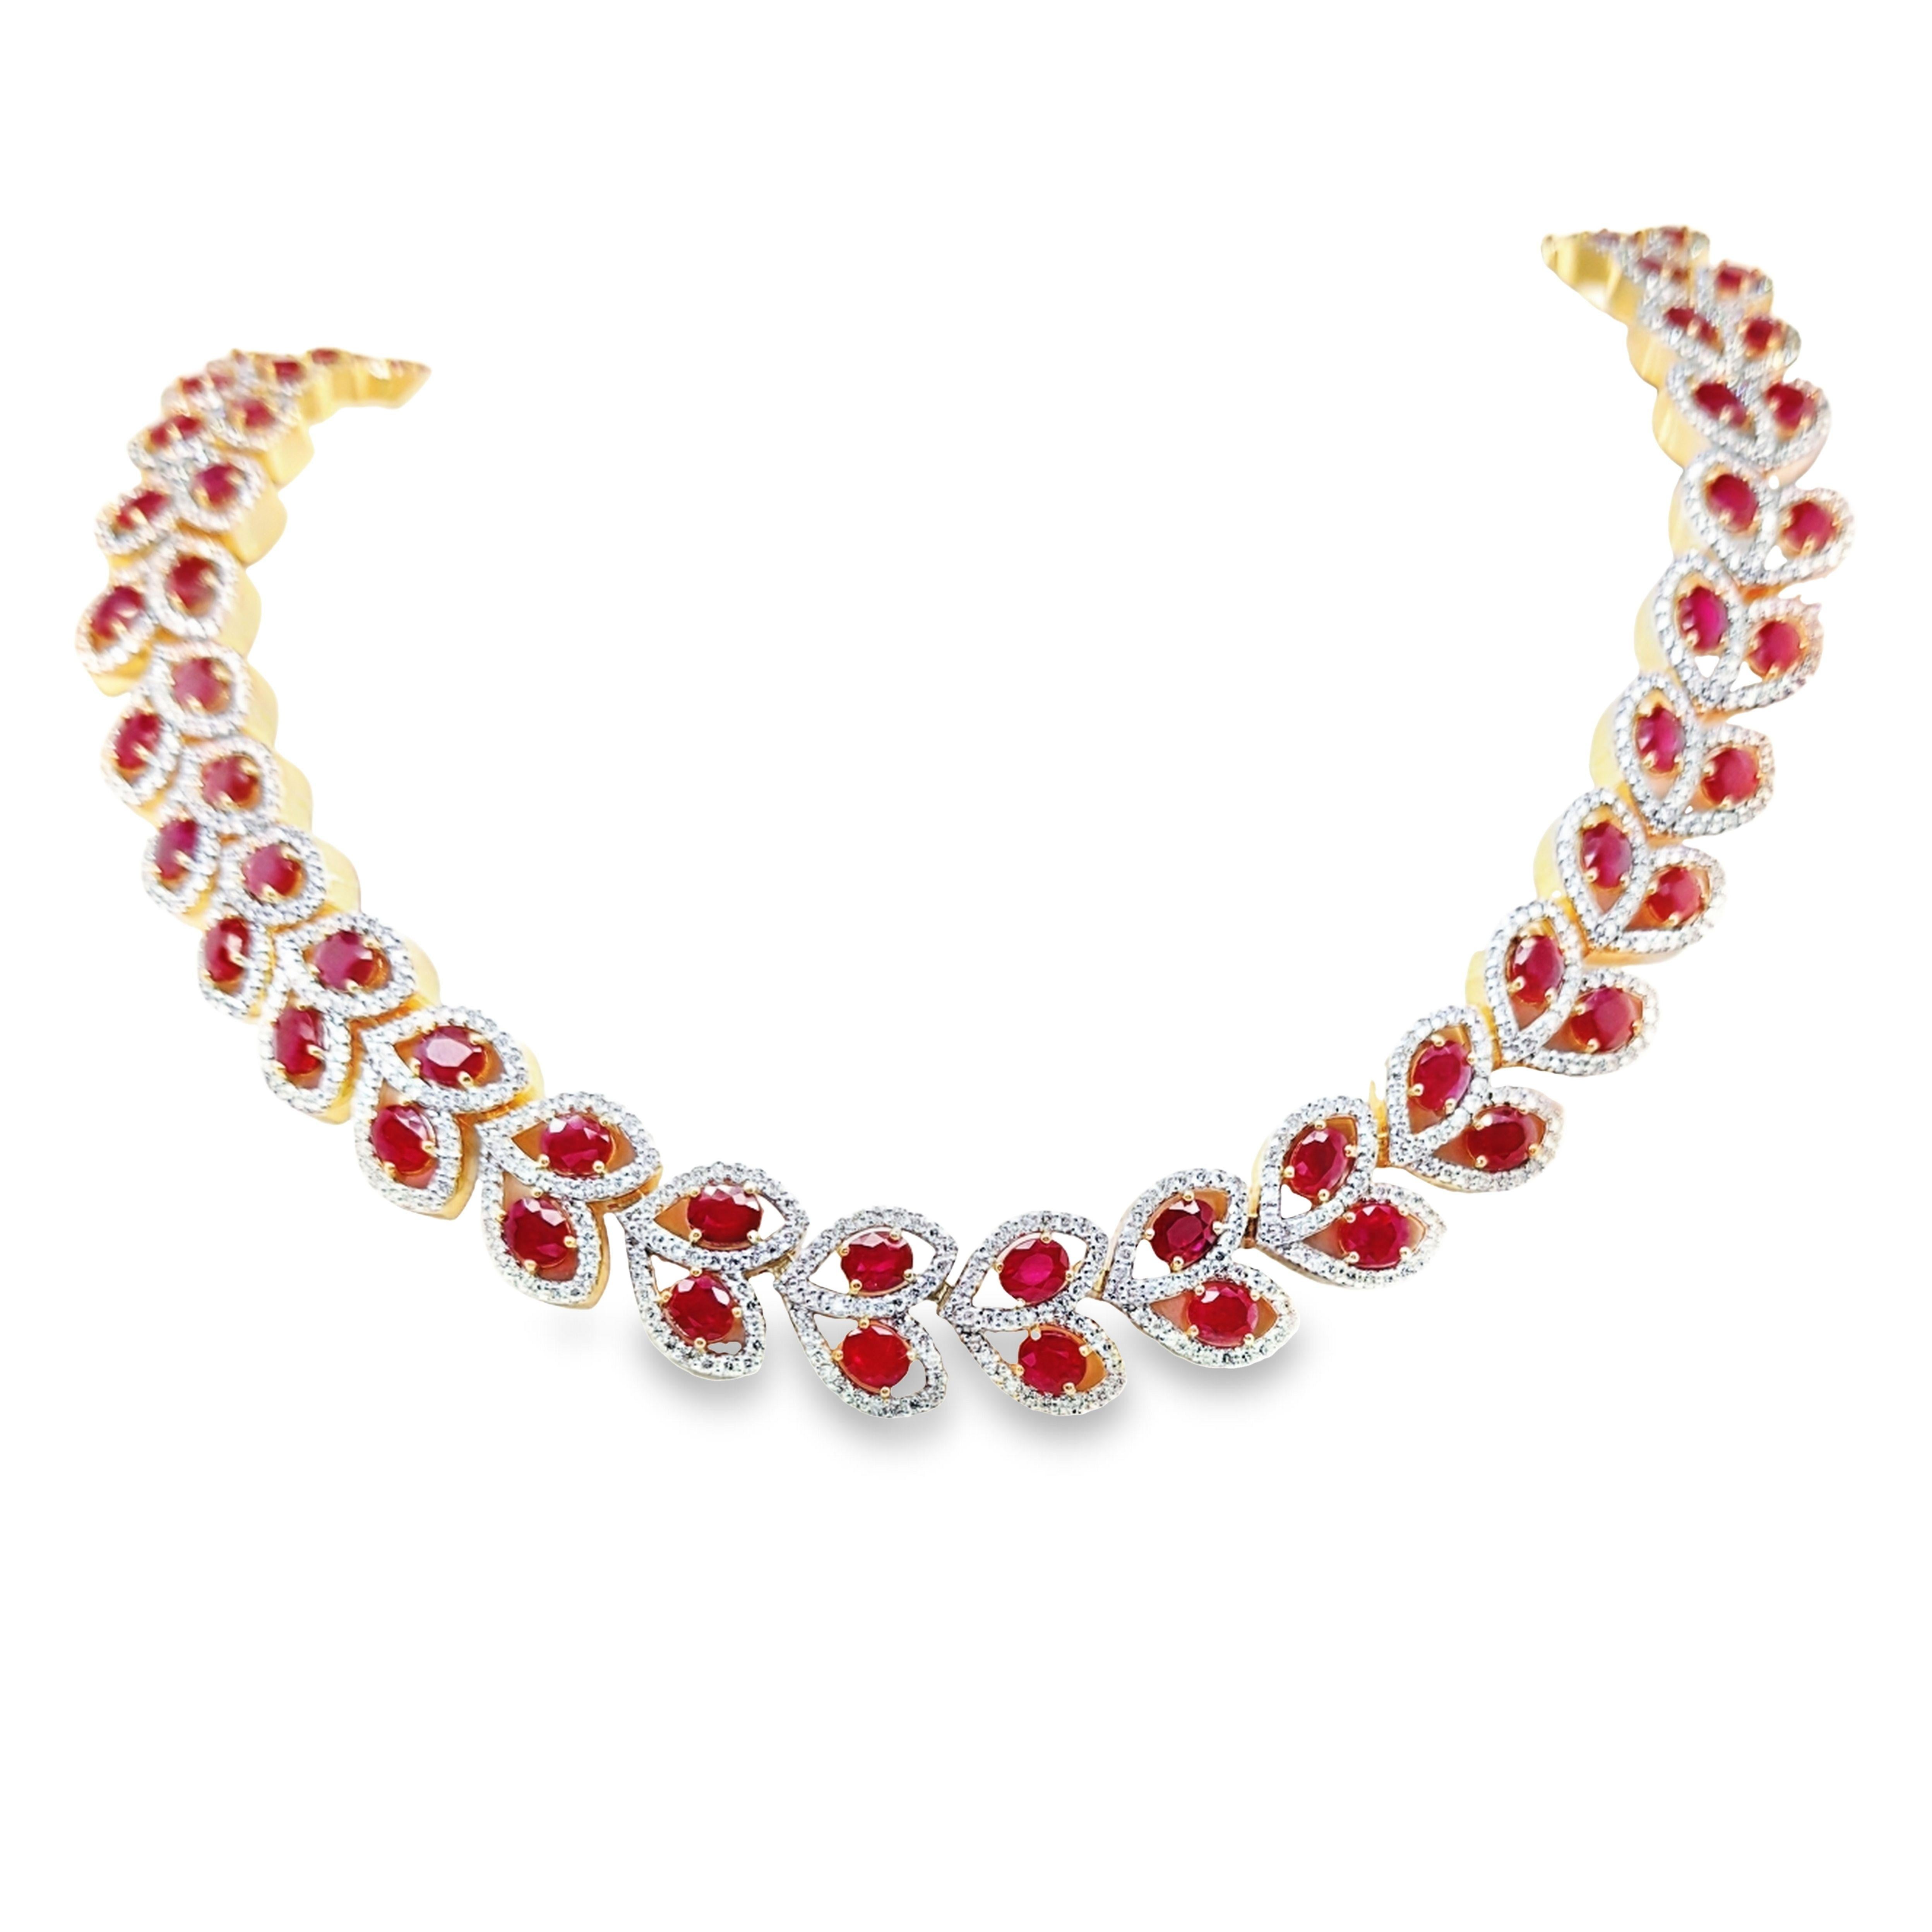 Immerse yourself in the allure of this exquisite necklace featuring an array of opulent gemstones. Crafted from the finest materials, this necklace boasts 76 oval mixed-cut rubies from Burma, certified by IGI for their natural origin, totalling an